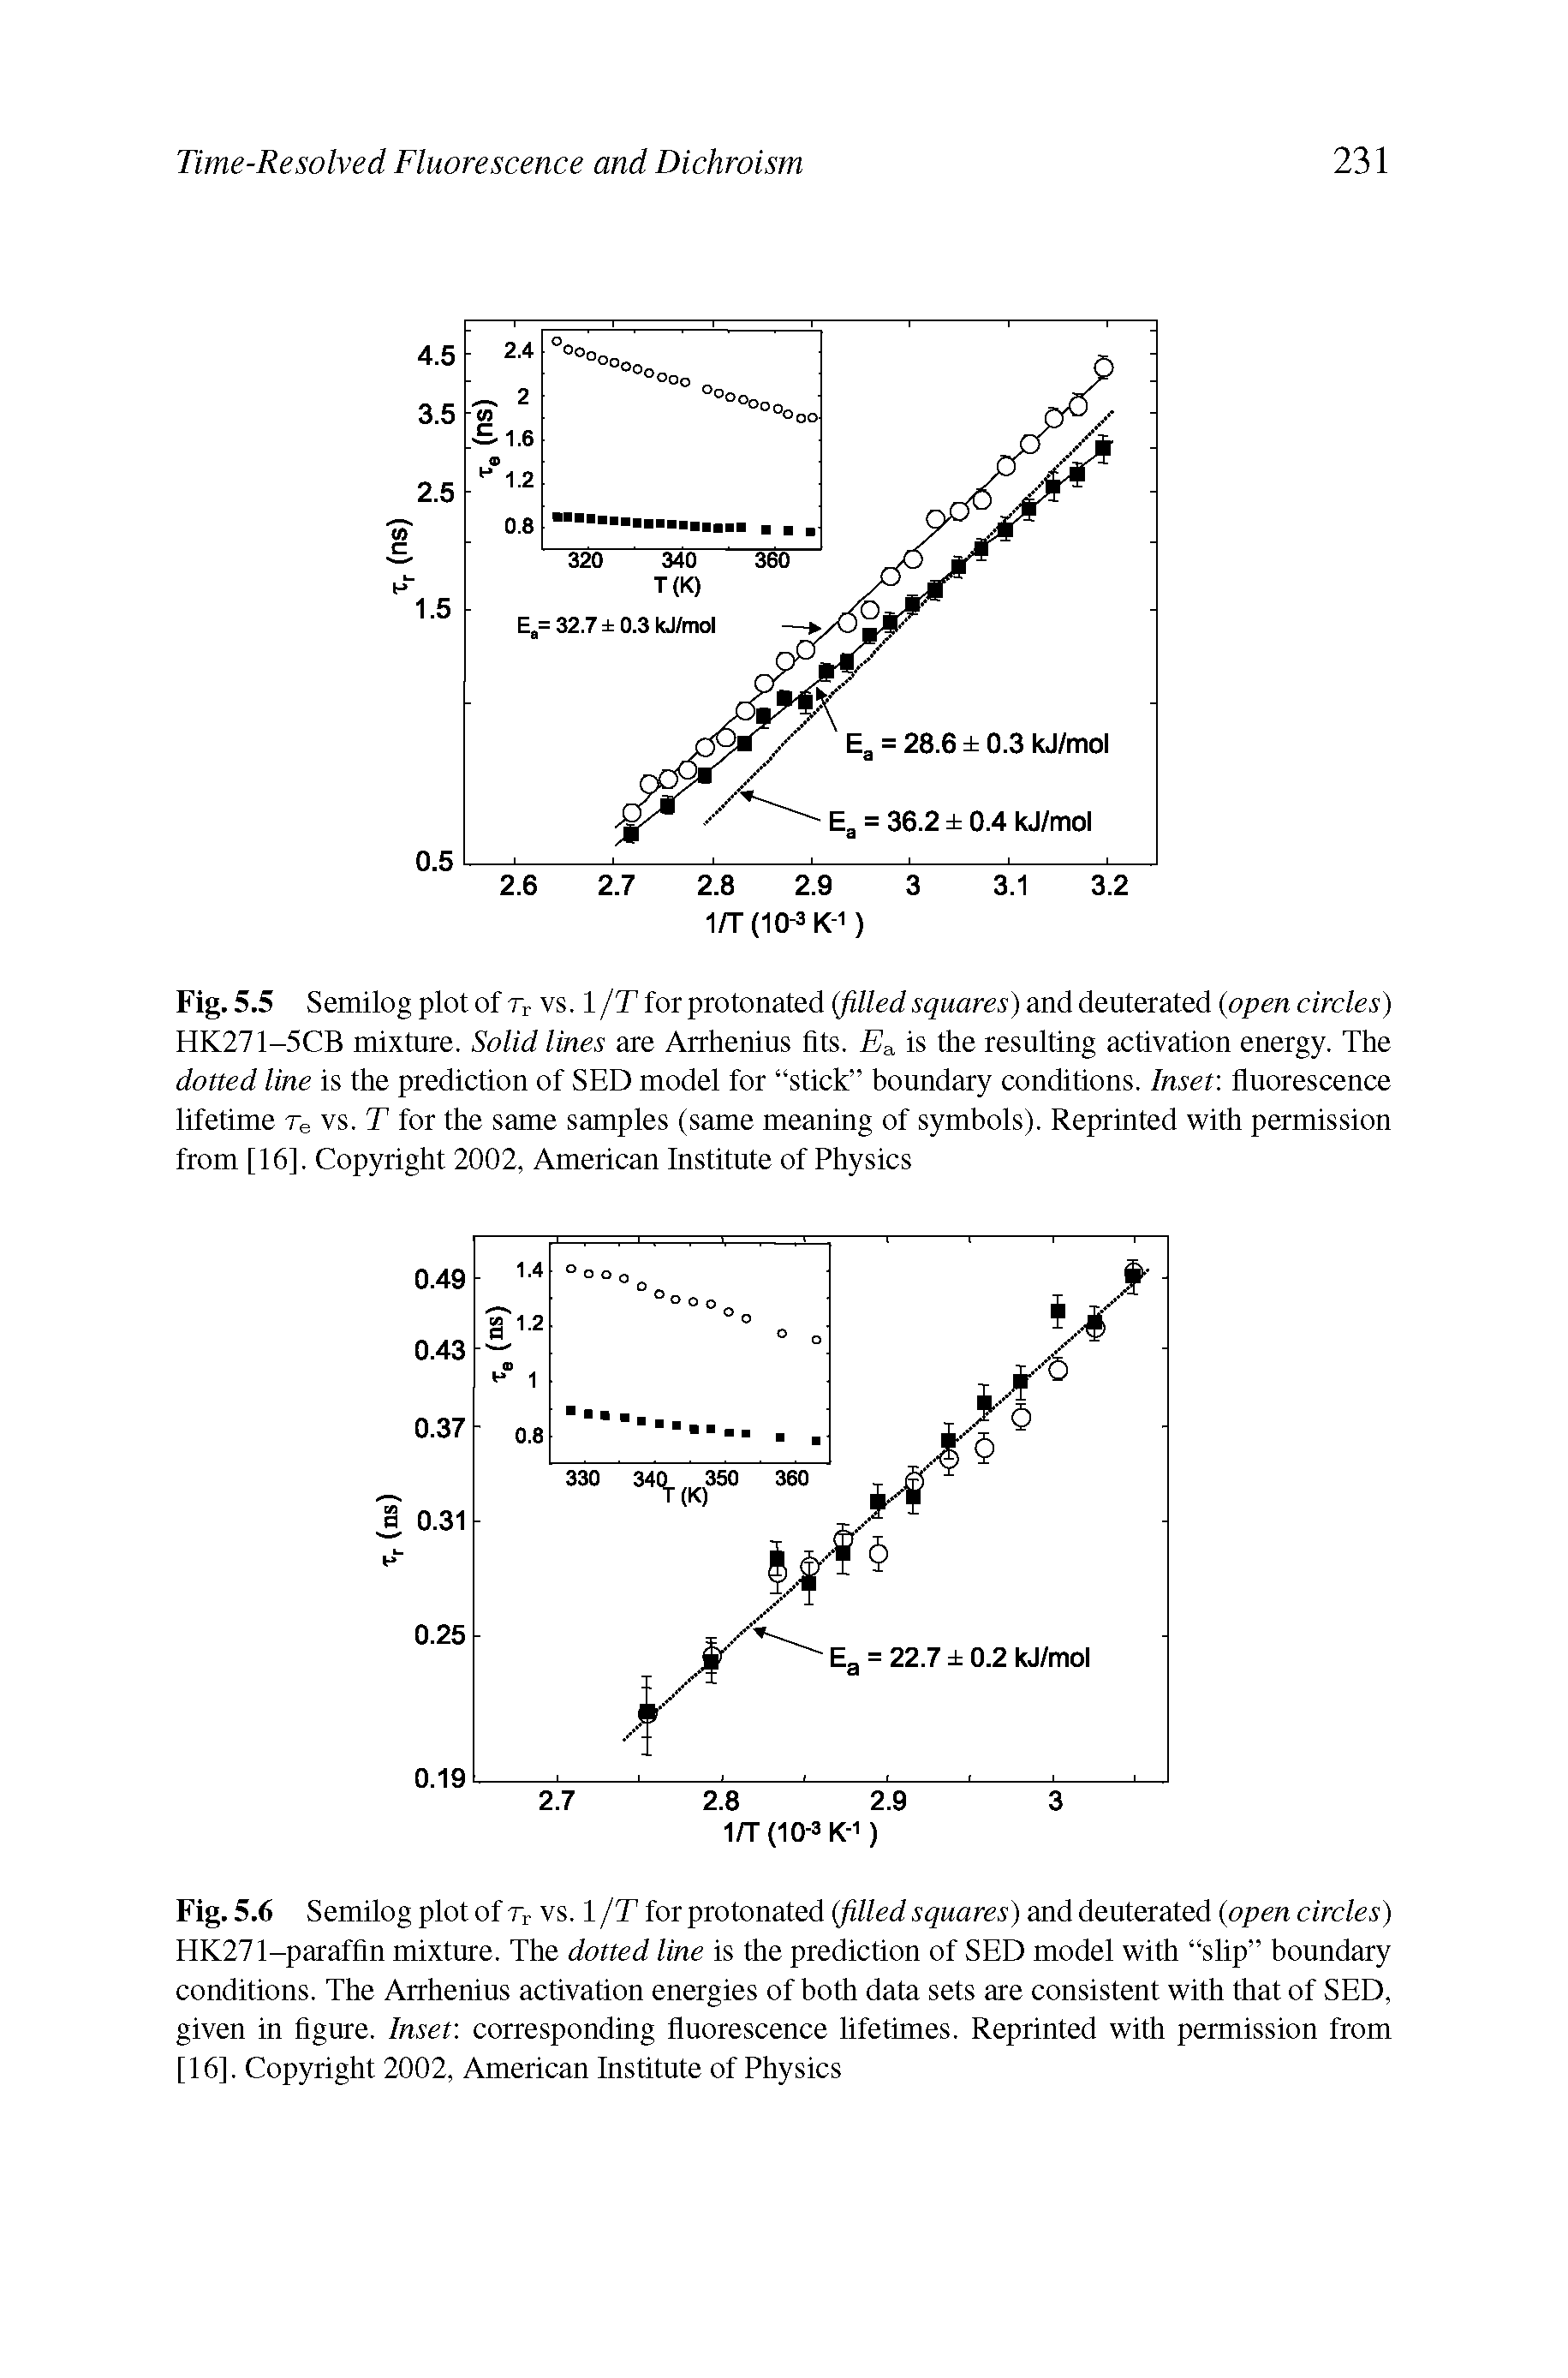 Fig. 5.6 Semilog plot of Tr vs, 1 /T for protonated (filled squares) and deuterated (open circle. ) HK271-paraffin mixture. The dotted line is the prediction of SED model with slip boundary conditions. The Arrhenius activation energies of both data sets are consistent with that of SED, given in figure. Inset corresponding fluorescence lifetimes. Reprinted with permission from [16], Copyright 2002, American Institute of Physics...